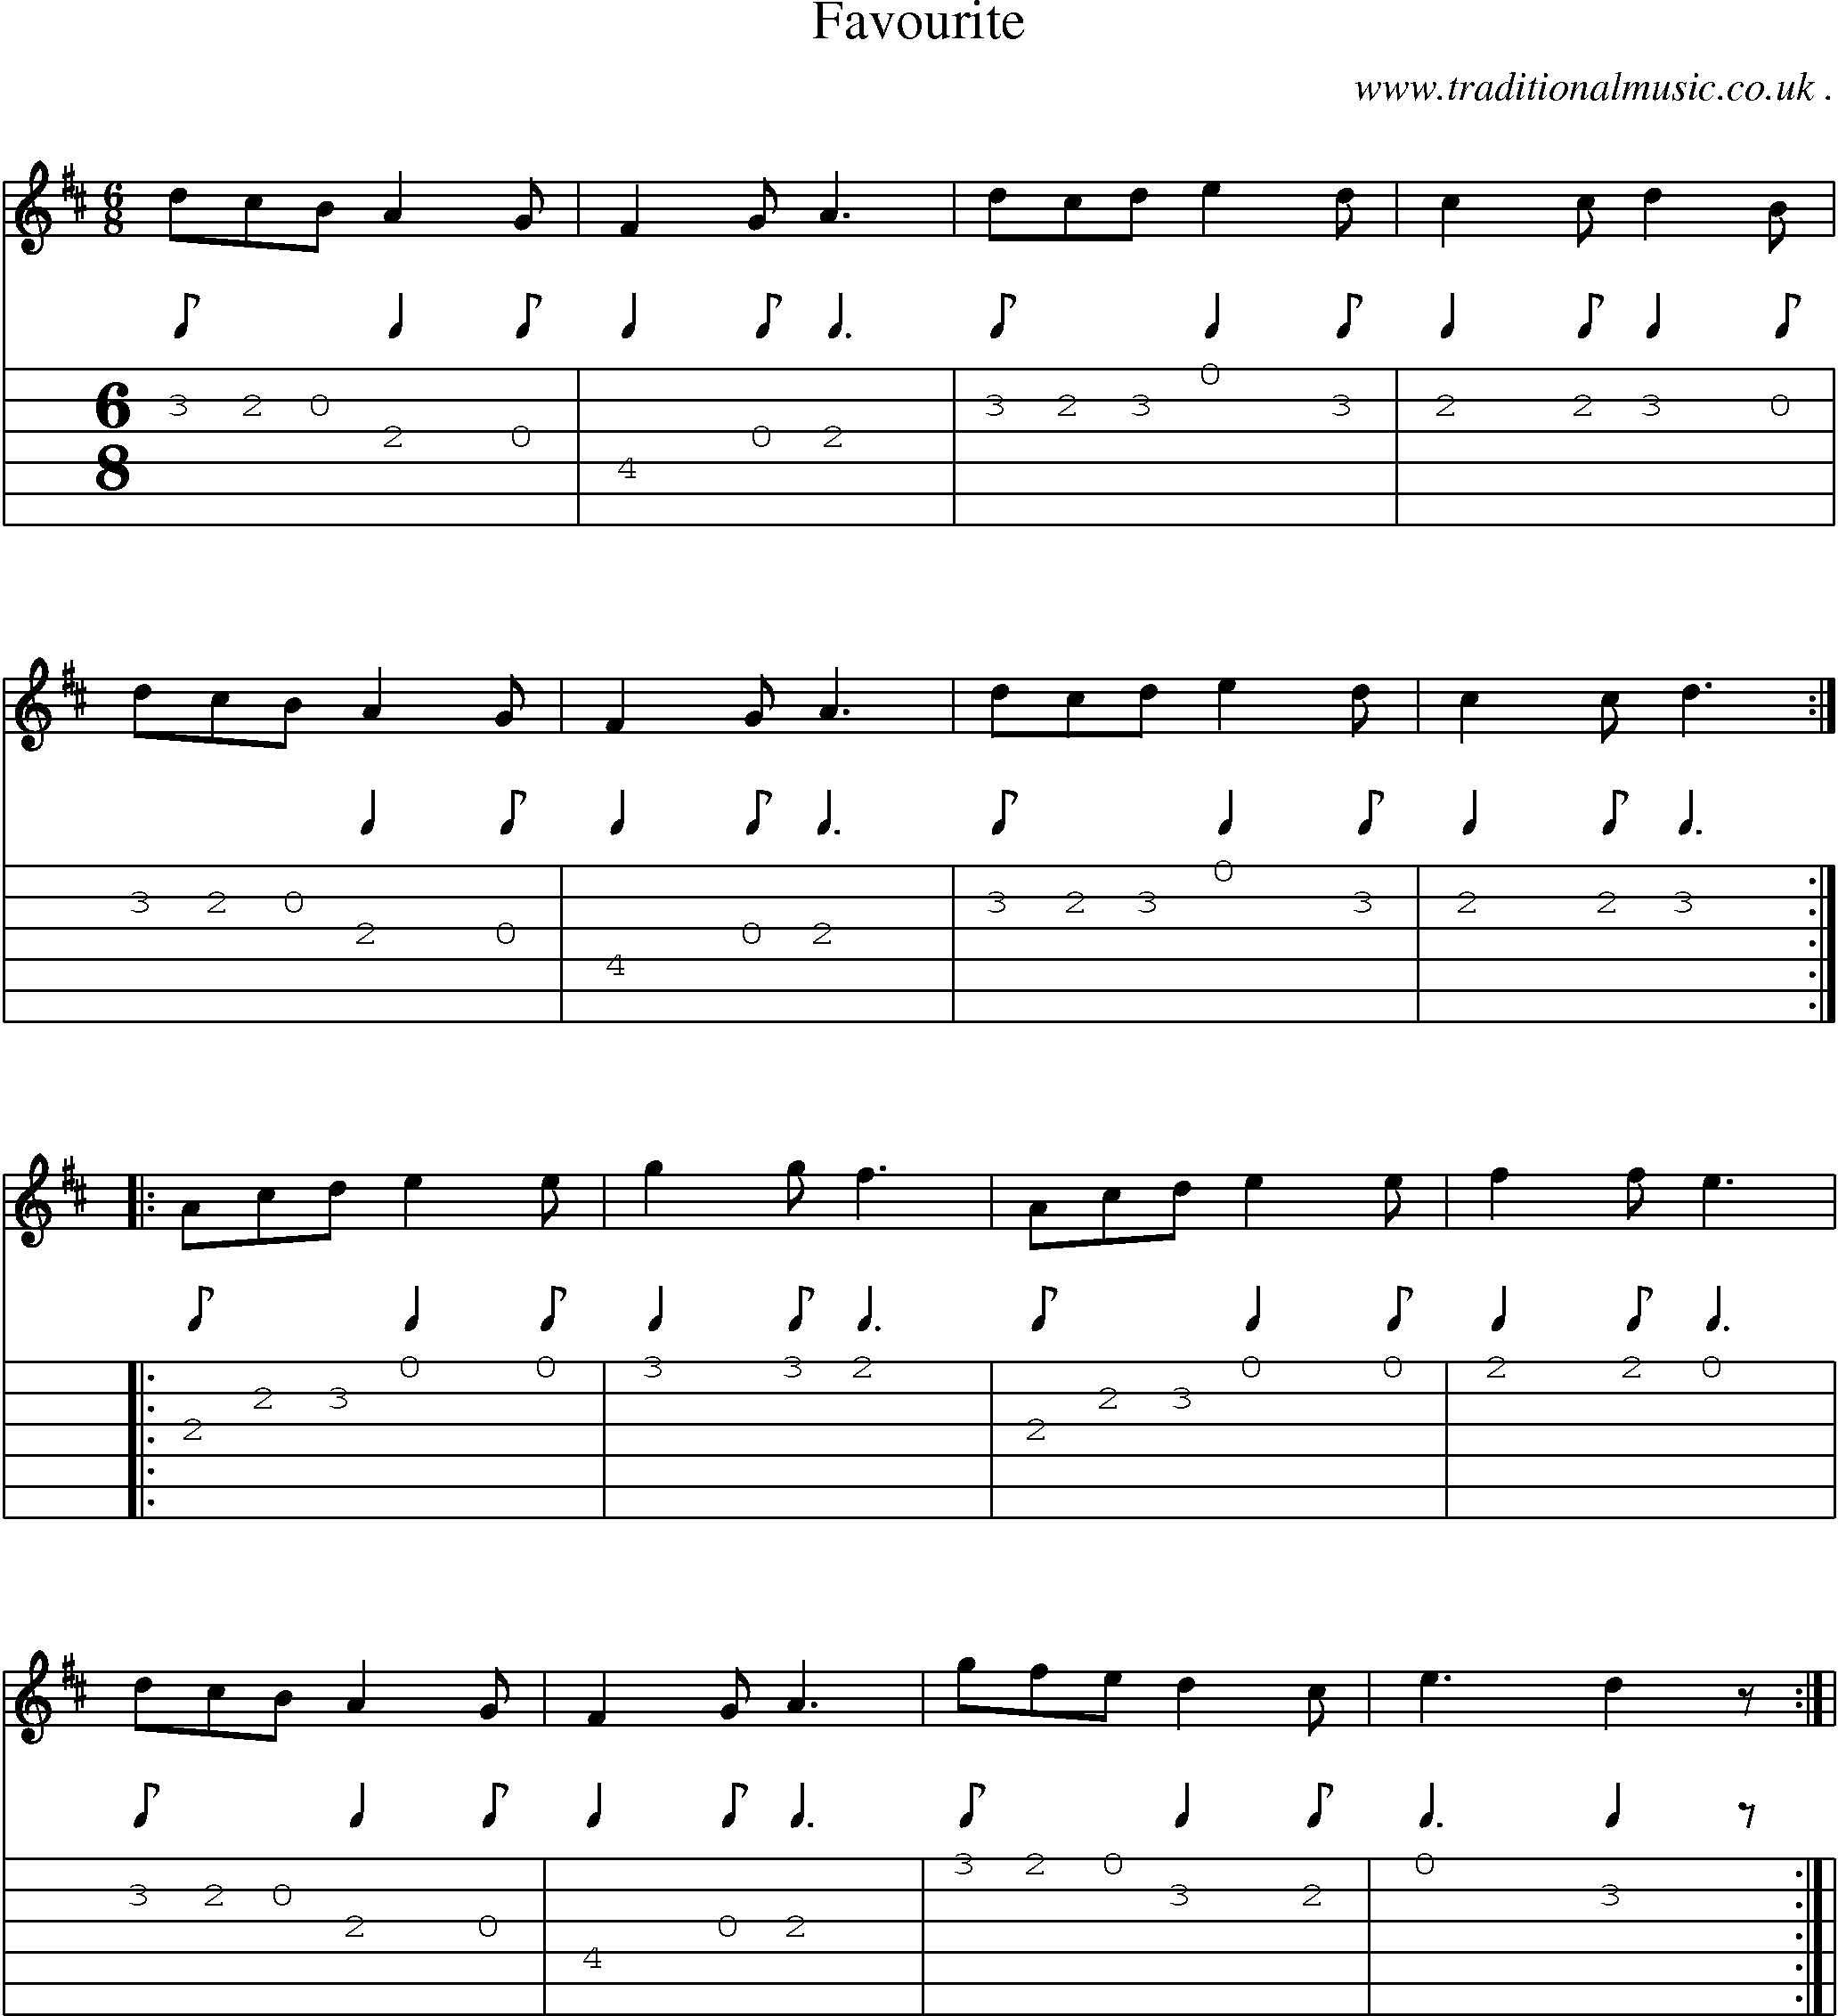 Sheet-Music and Guitar Tabs for Favourite